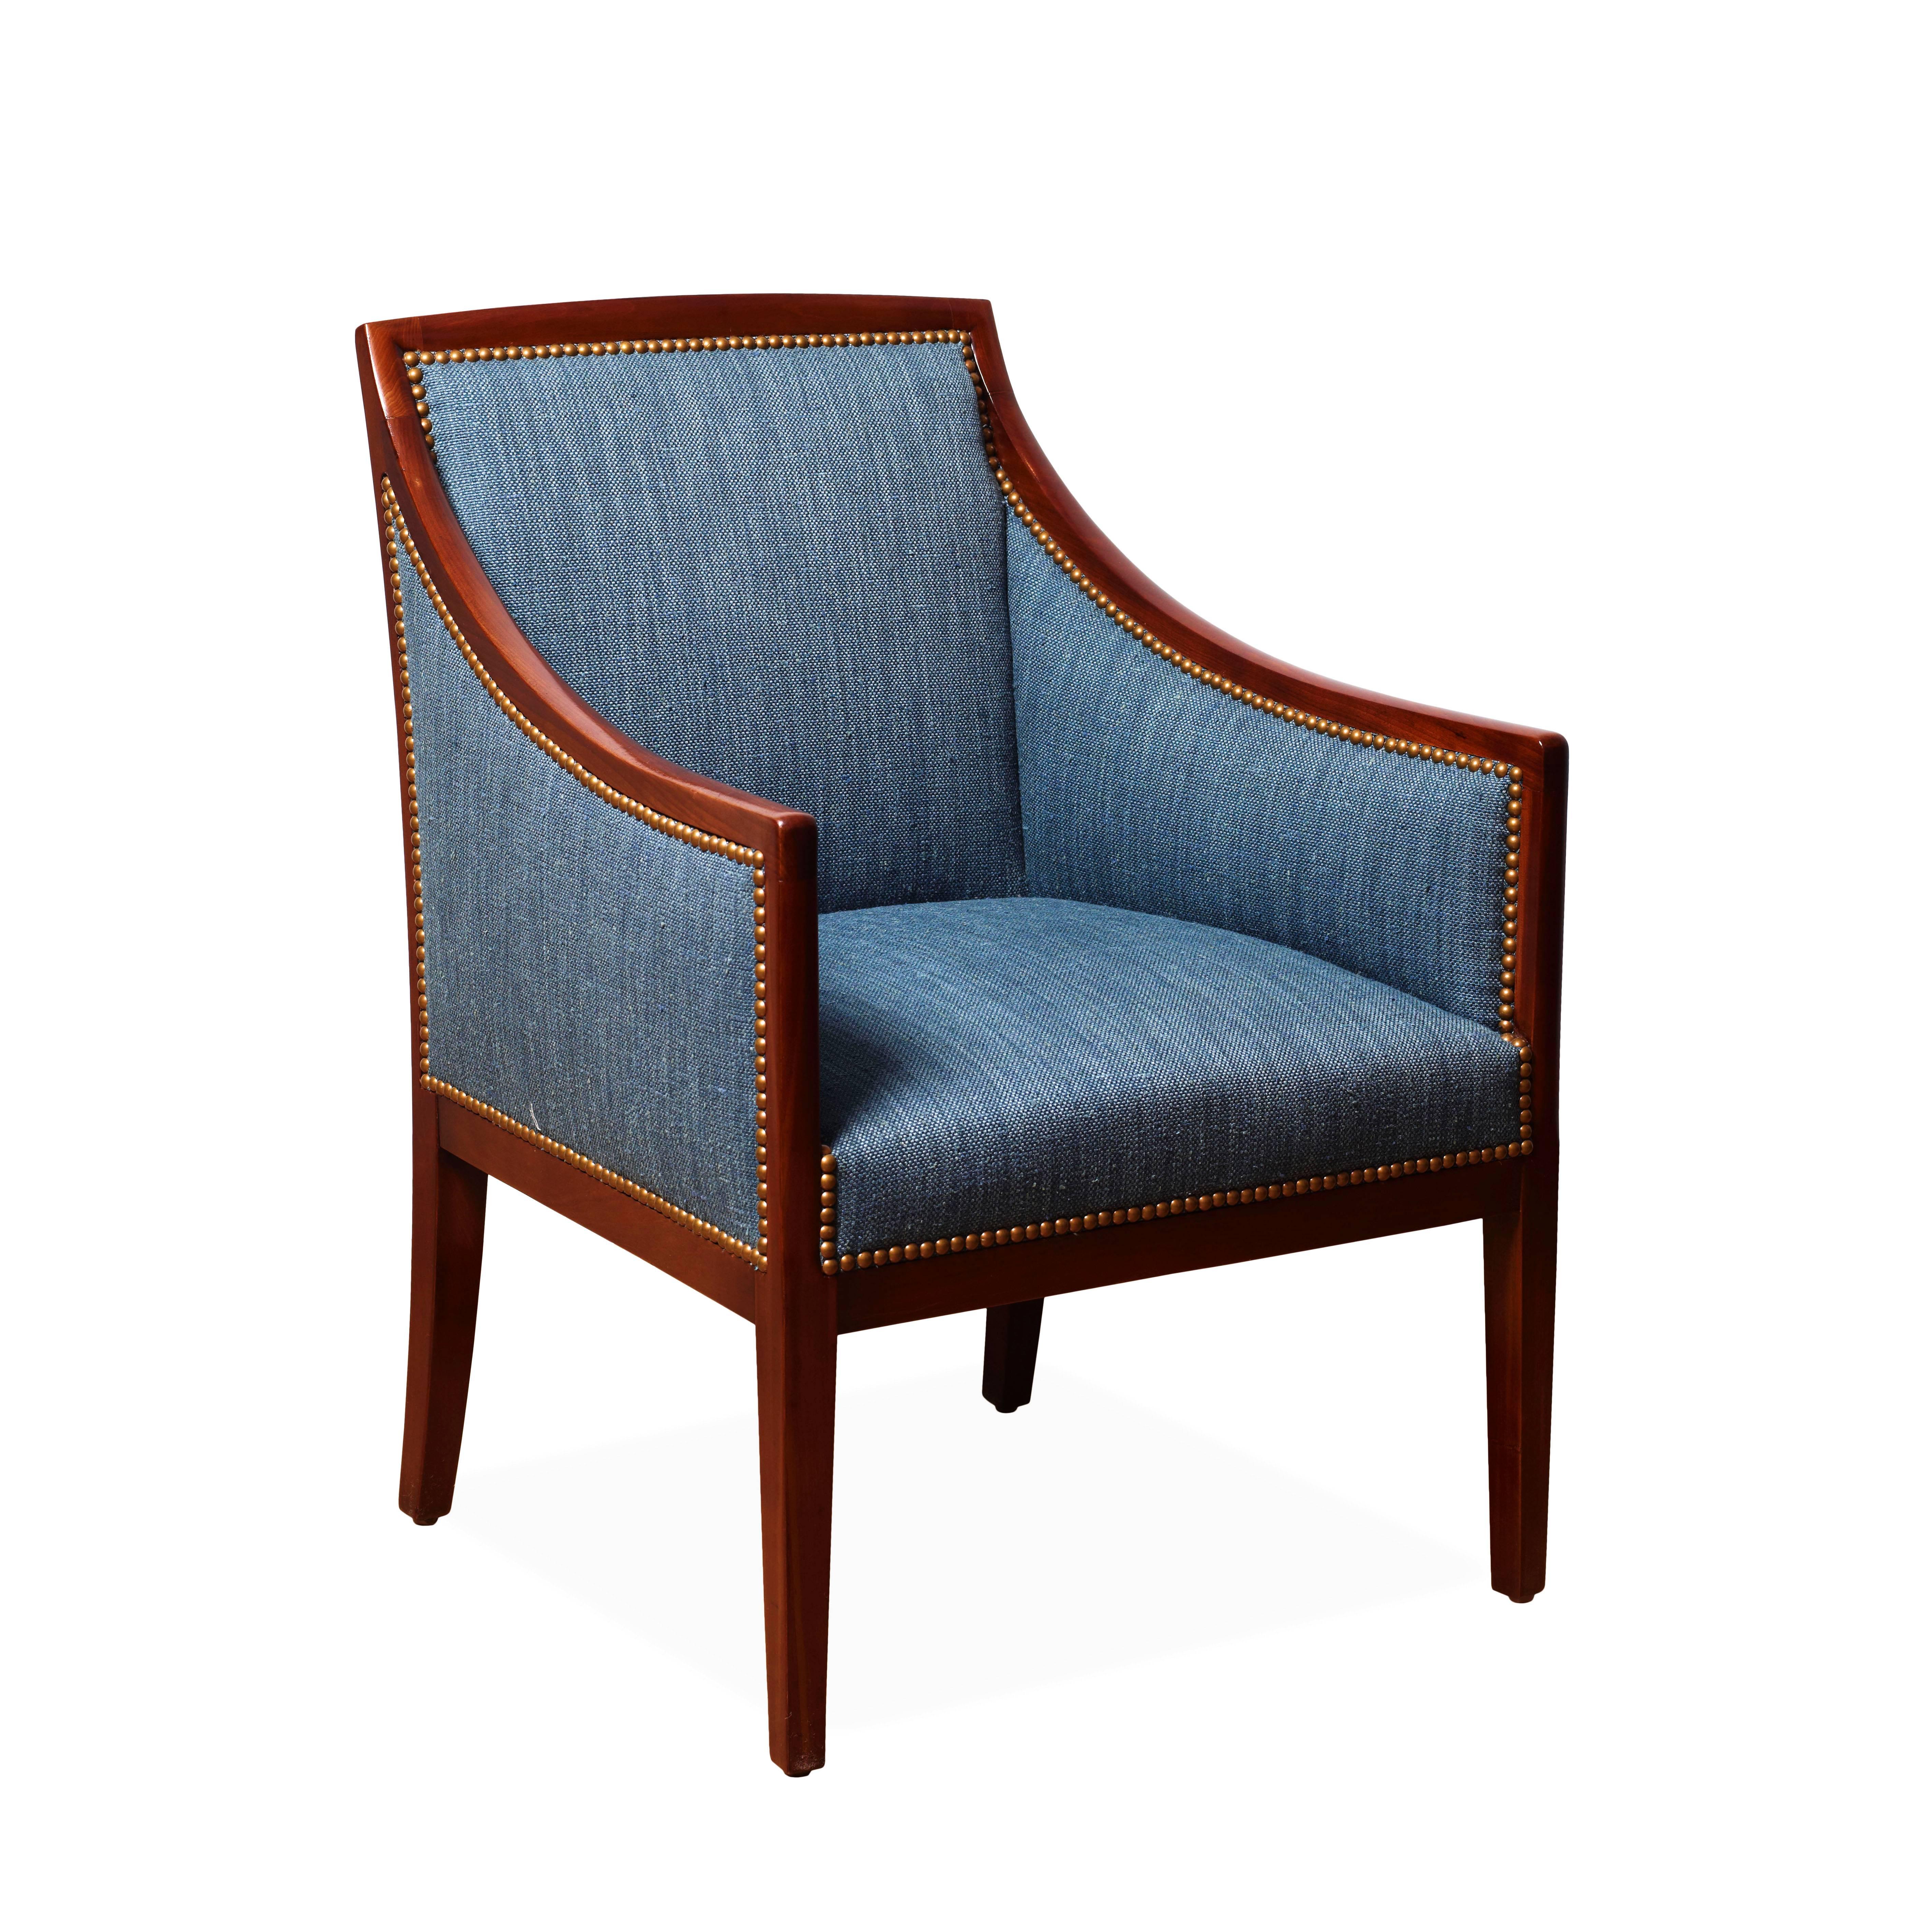 Wonderfully elegant pair of French armchairs with sinuously curved Cuban mahogany framing. Attributed to Jean-Michel Frank (1895-1941), although not stamped or numbered, the attention to detail in the construction (note the delicate entasis in the